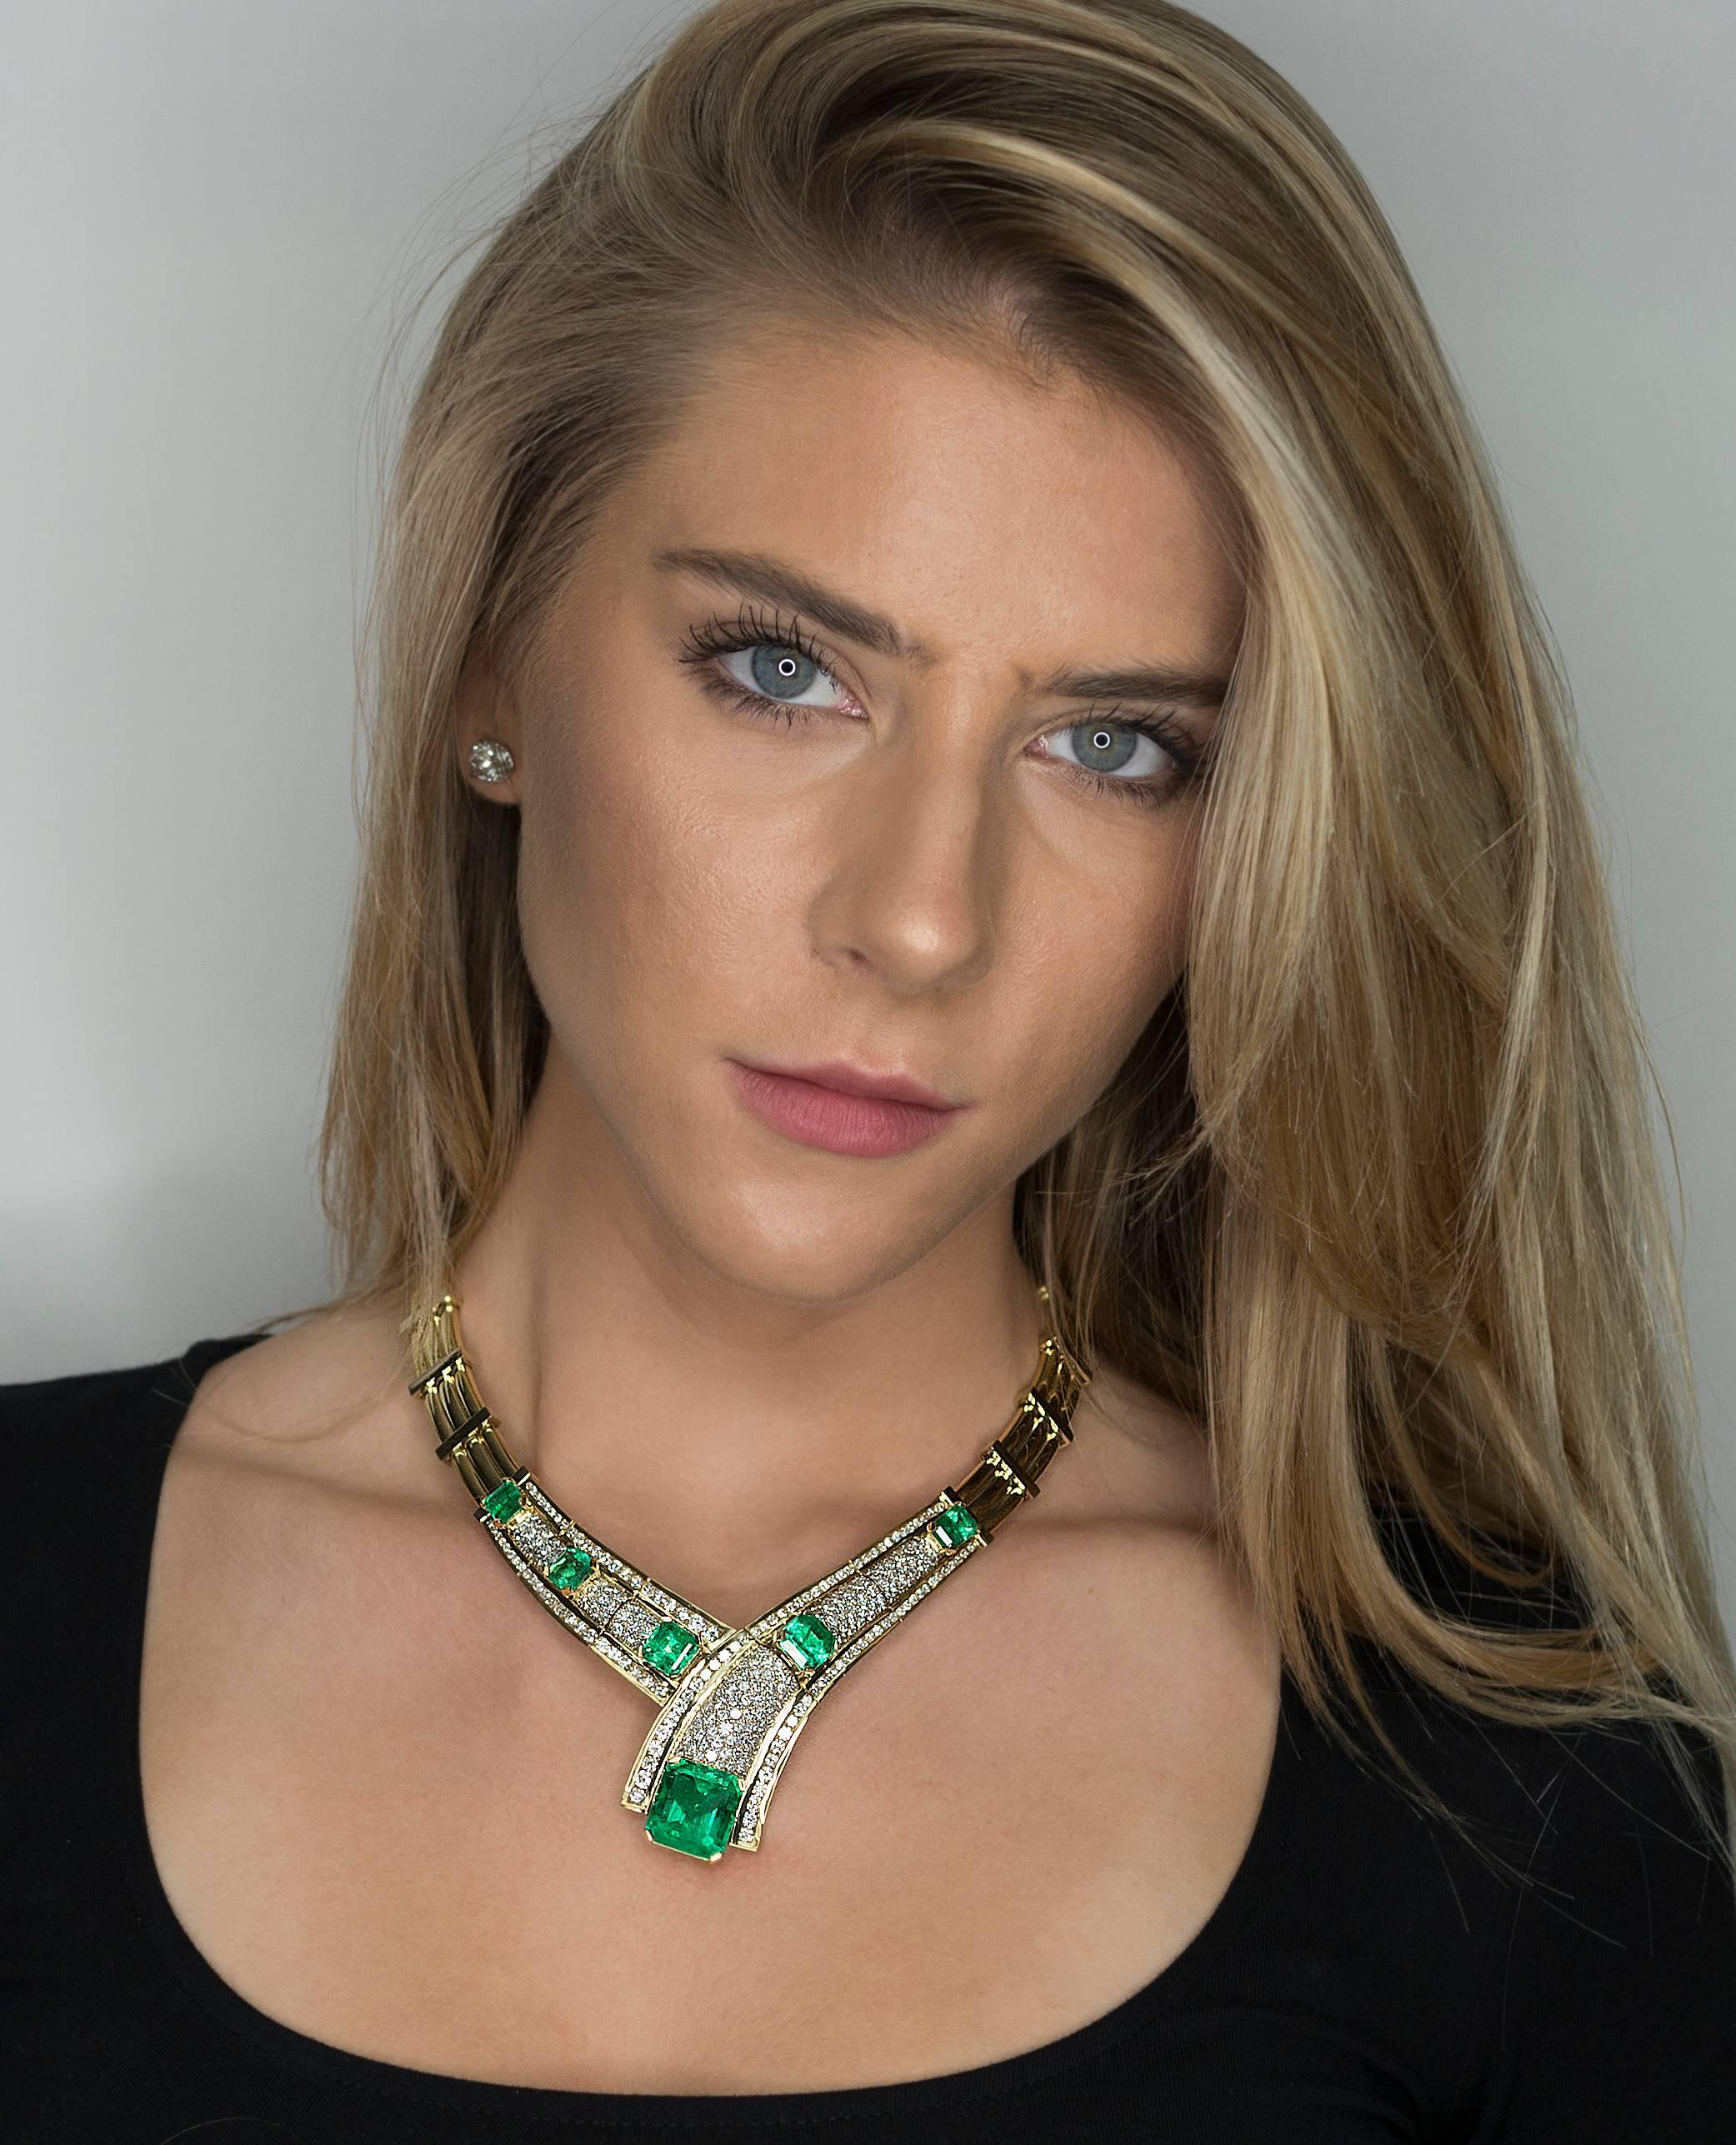 18k Necklace with 6 deep green Colombian Emeralds weighing approximately 40.00 carats and approximately 15.00 carats of modern round brilliant diamonds. 178g